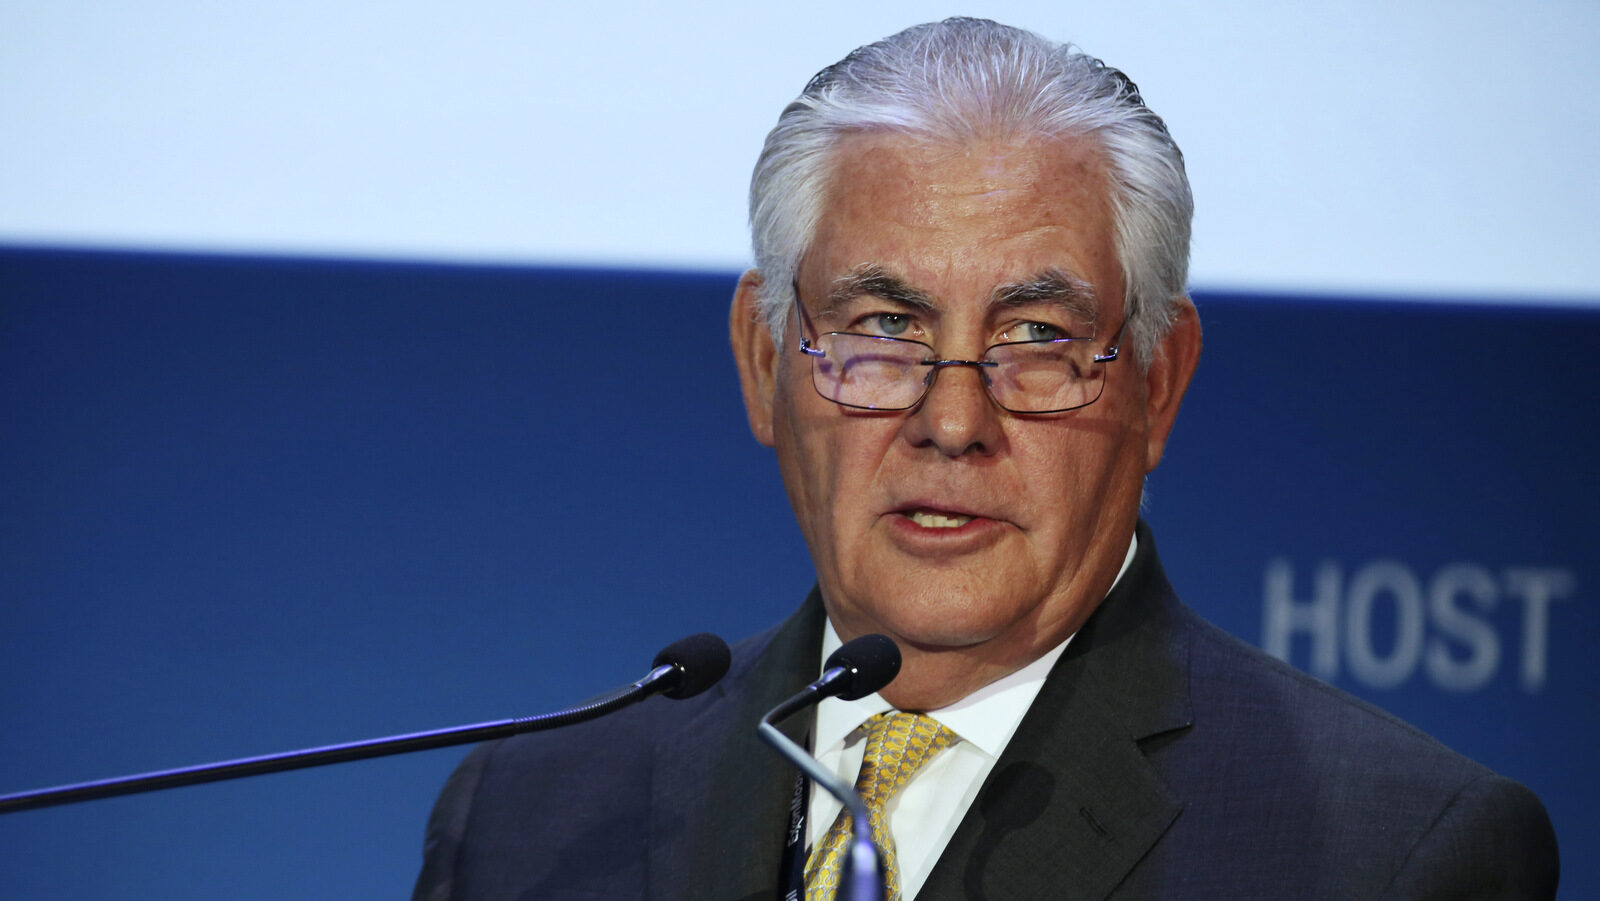 ExxonMobil CEO and chairman Rex W. Tillerson gives a speech at the annual Abu Dhabi International Petroleum Exhibition & Conference in Abu Dhabi, United Arab Emirates, on Monday, Nov. 7, 2016. (AP Photo/Jon Gambrell)